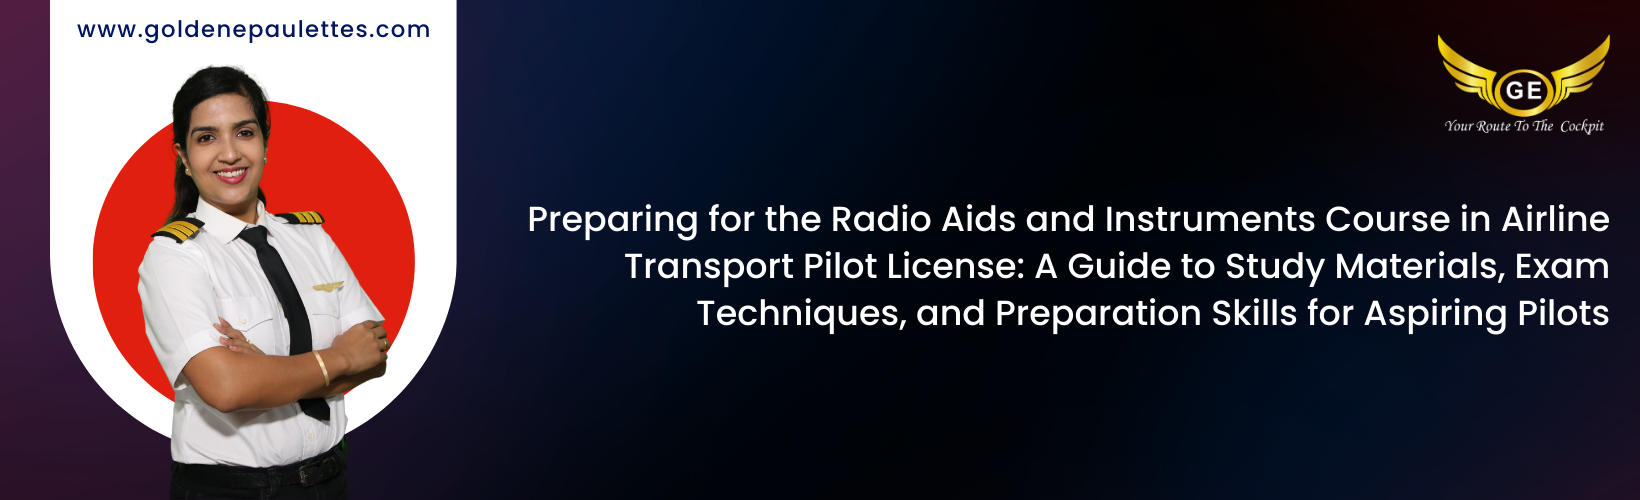 A Look at the Radio Aids and Instruments Course in Airline Transport Pilot License